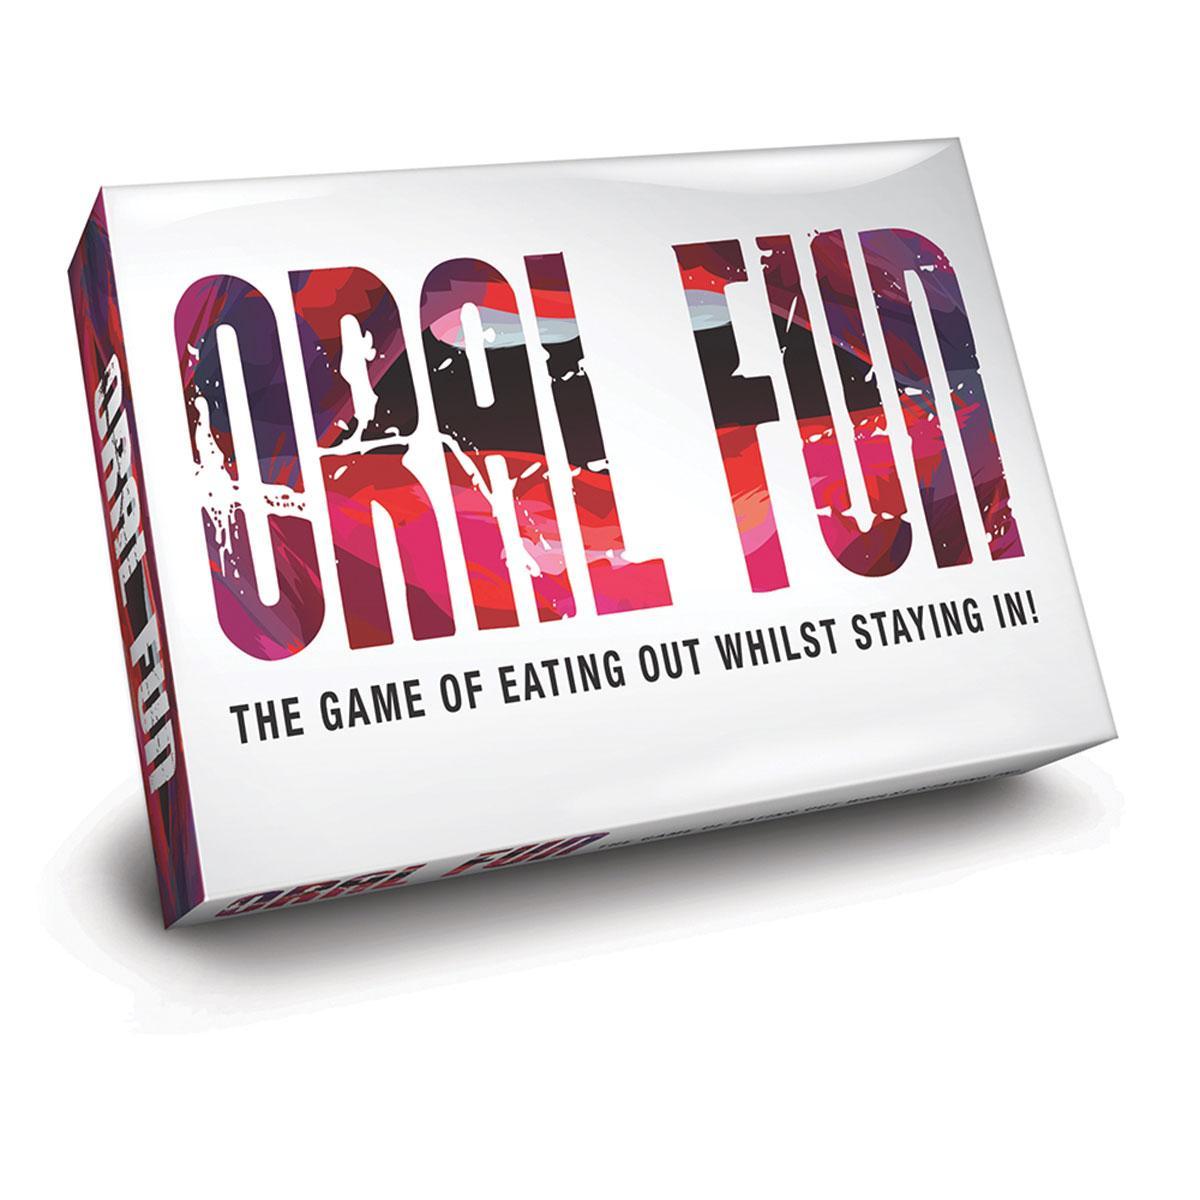 Oral Fun Game - Buy At Luxury Toy X - Free 3-Day Shipping